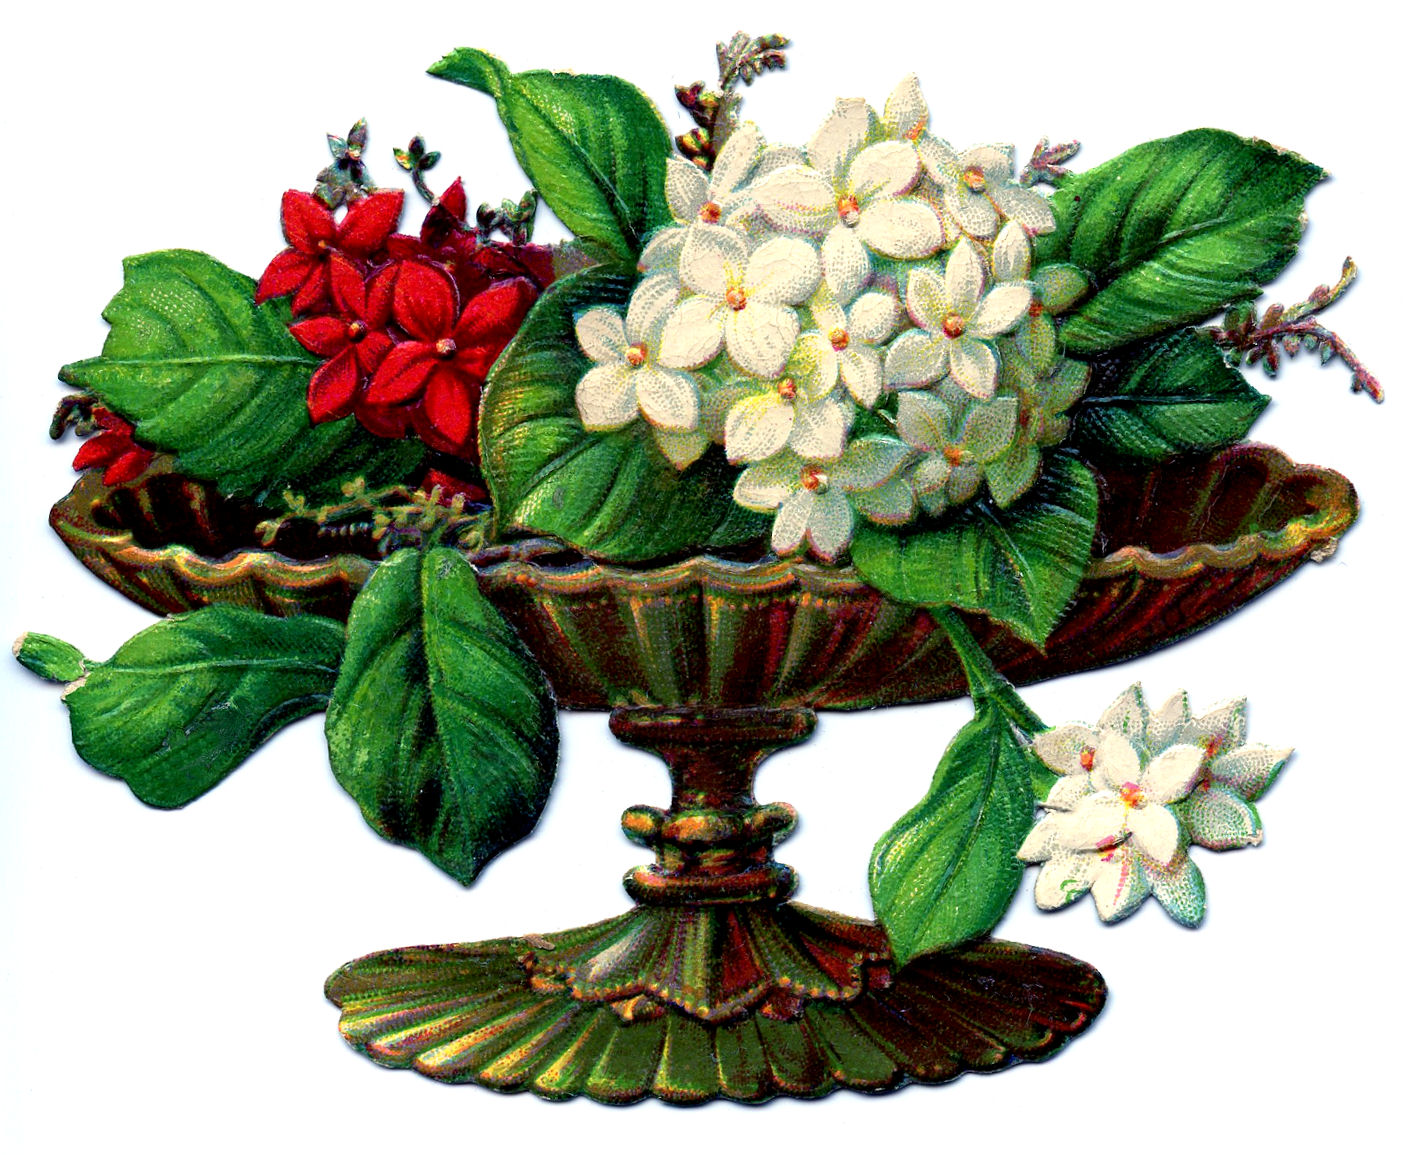 Victorian Clip Art - Flowers in Urns - The Graphics Fairy